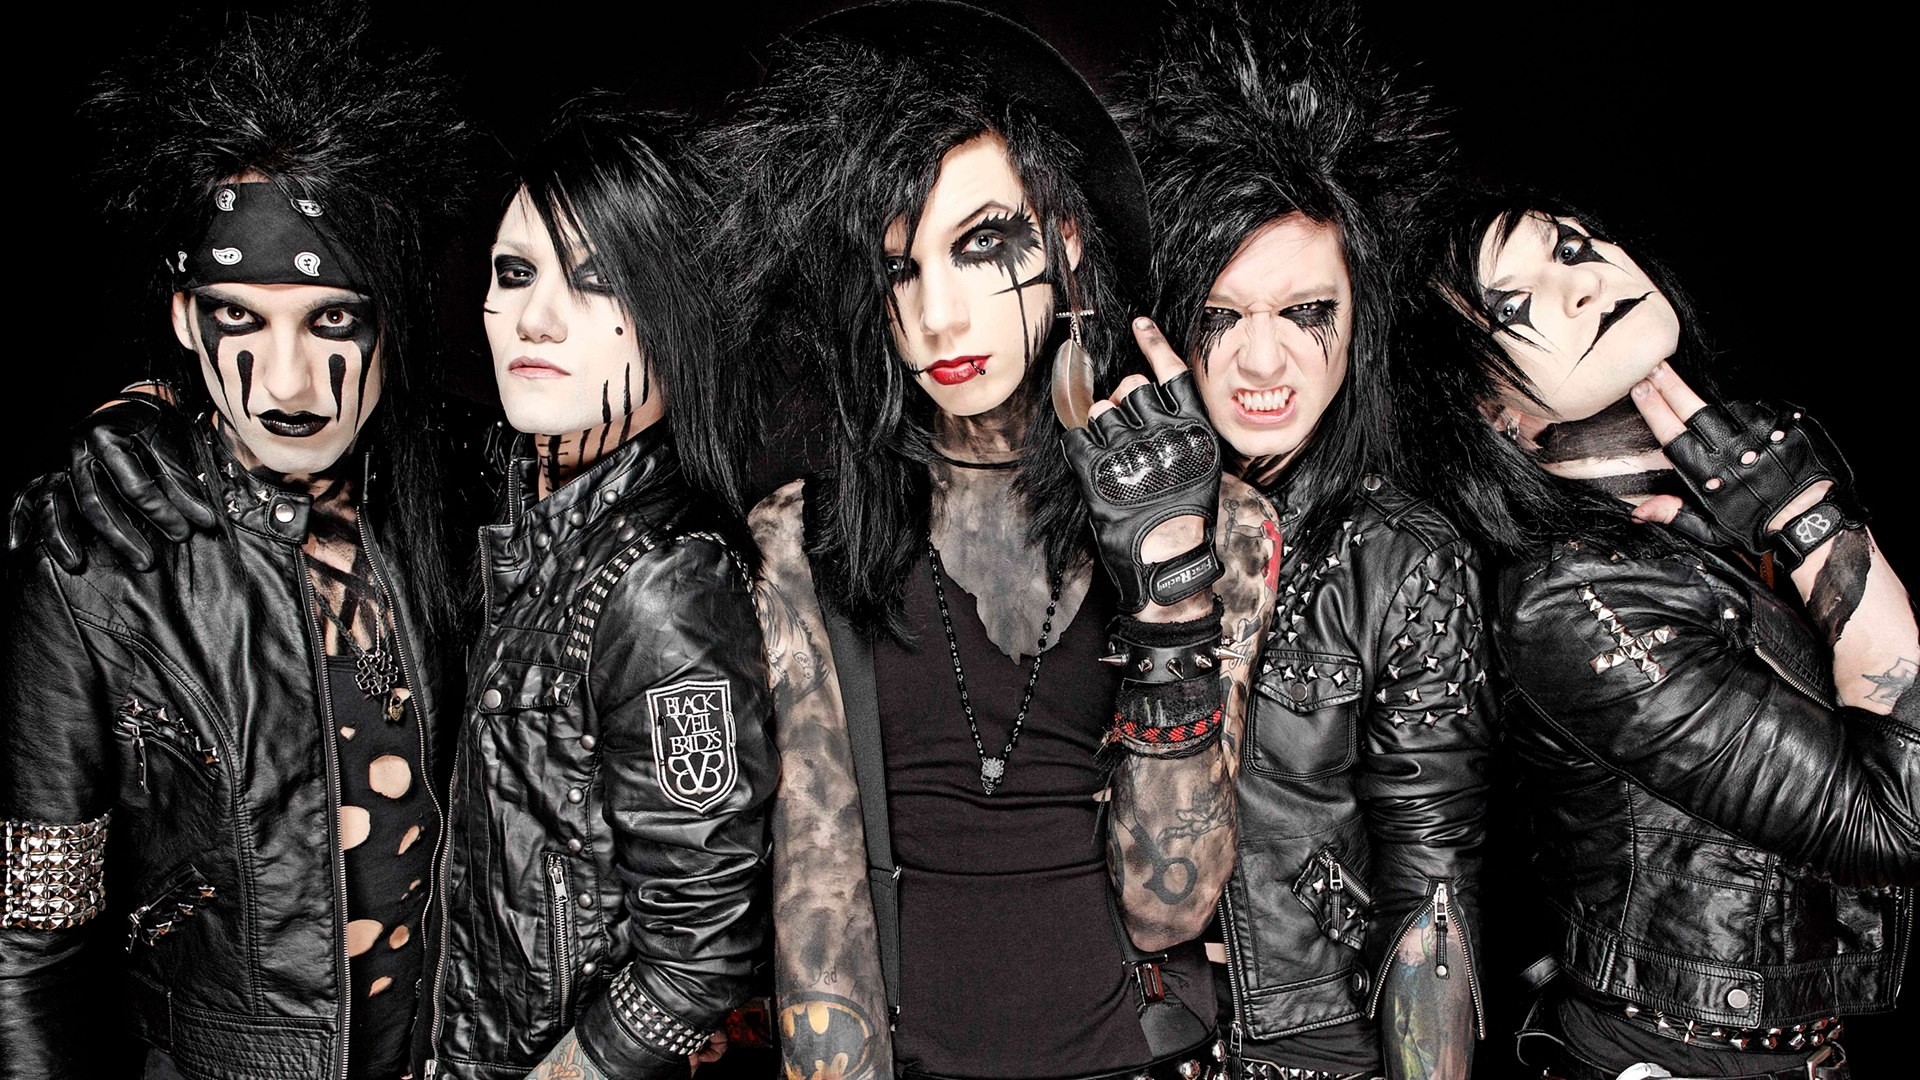 1920x1080 ... band, image news, pictures and videos and learn all about black veil  brides, band, image from wallpapers4u.org, your wallpaper news source.